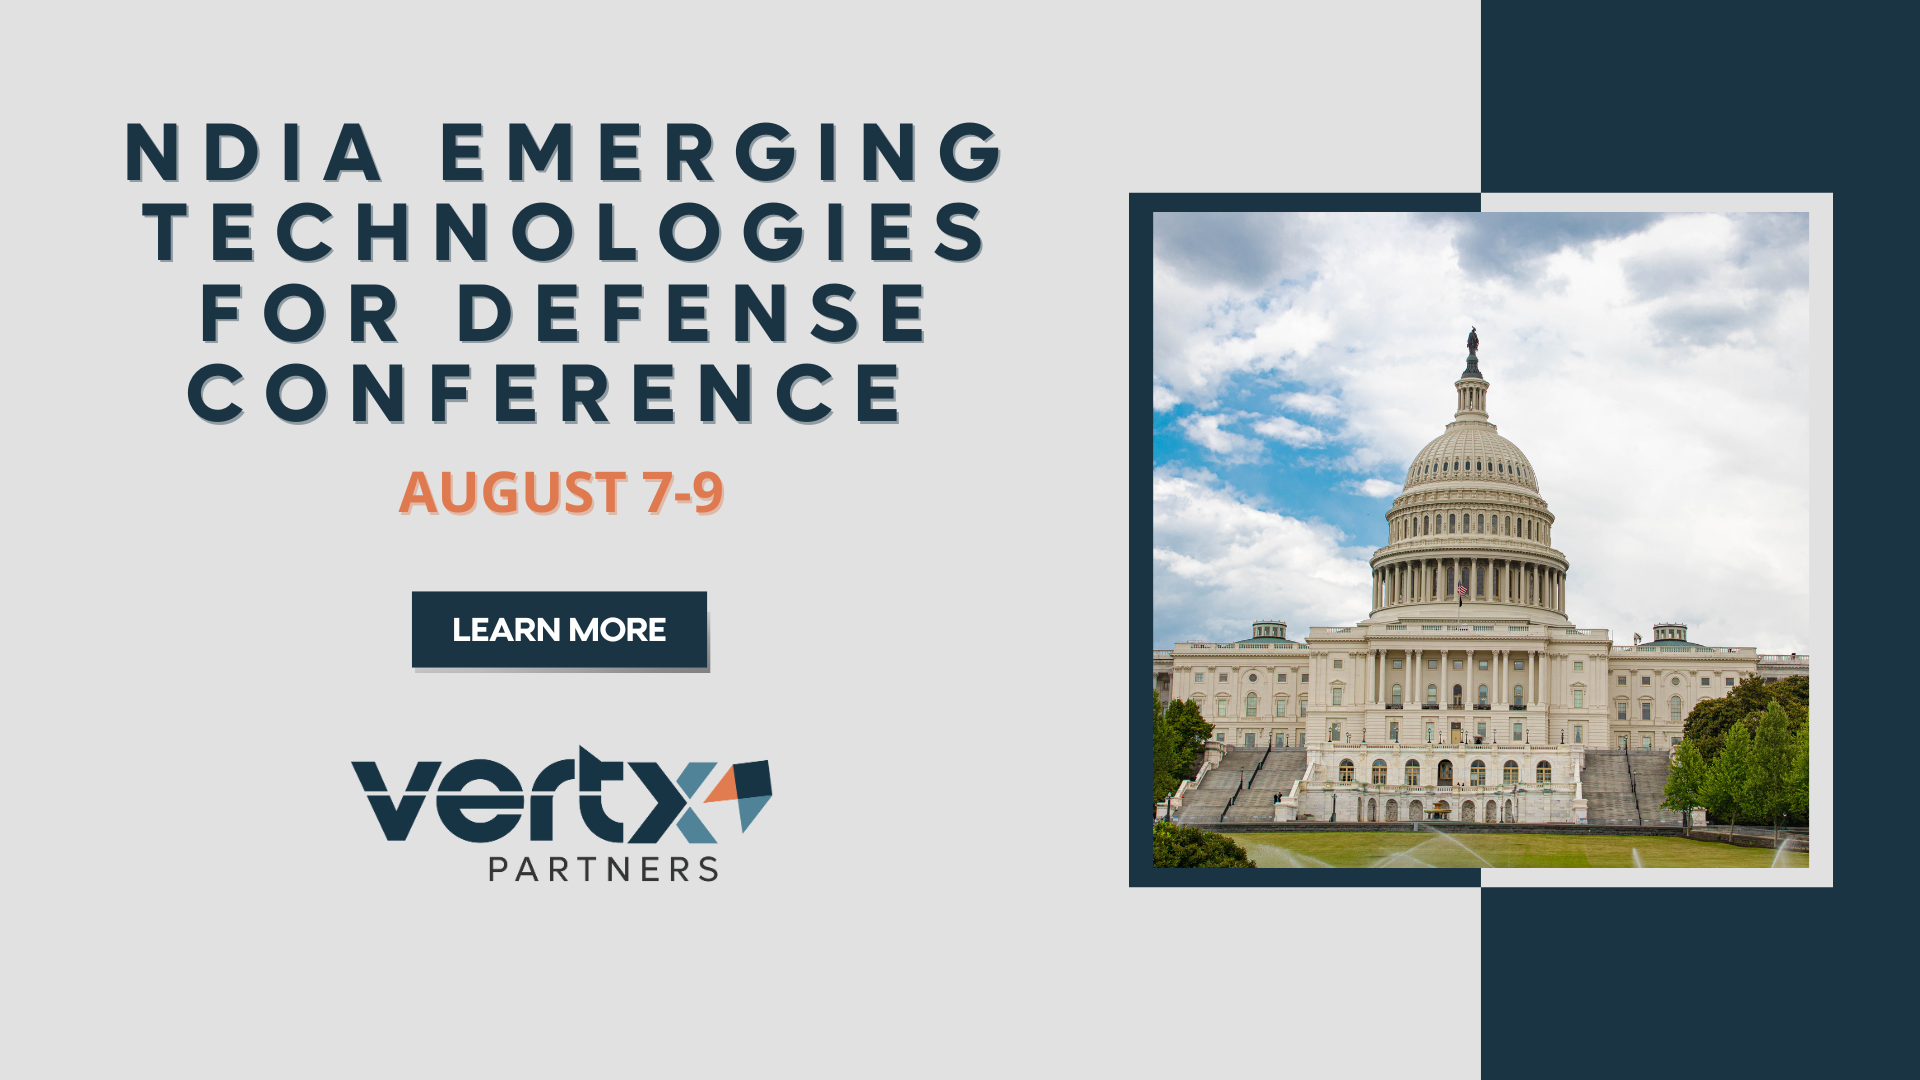 This Graphic has the title NDIA Emerging Technologies For Defense Conference & Exhibition with the date August 7-9 under it and a photo of the capital in washington dc to the right of the title and date.